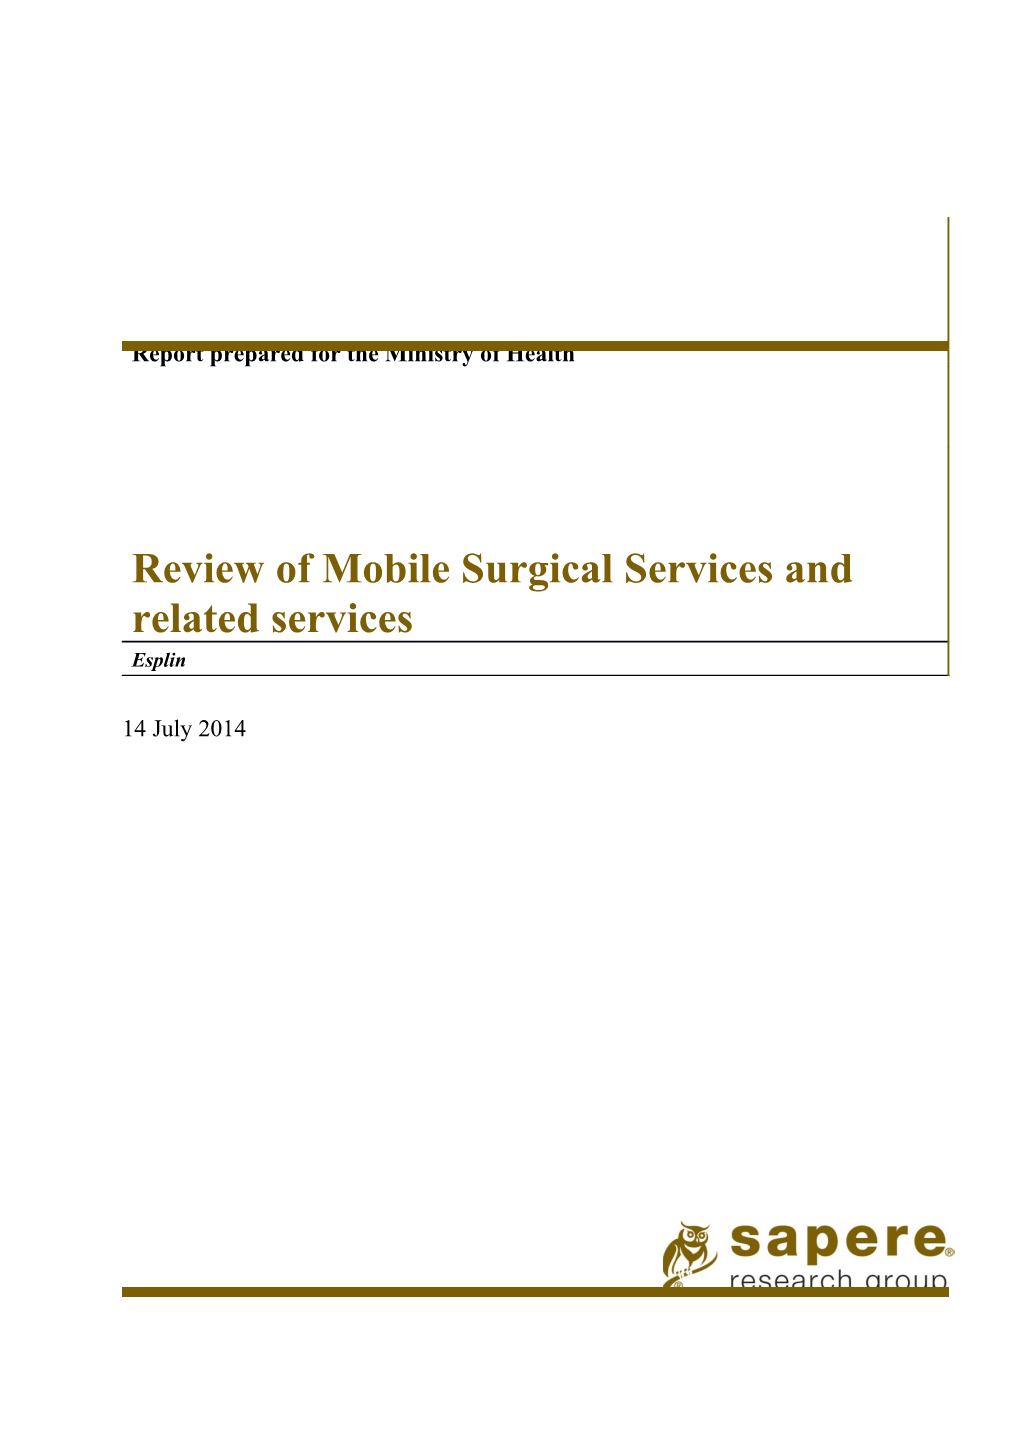 Review of Mobile Surgical Services and Related Services